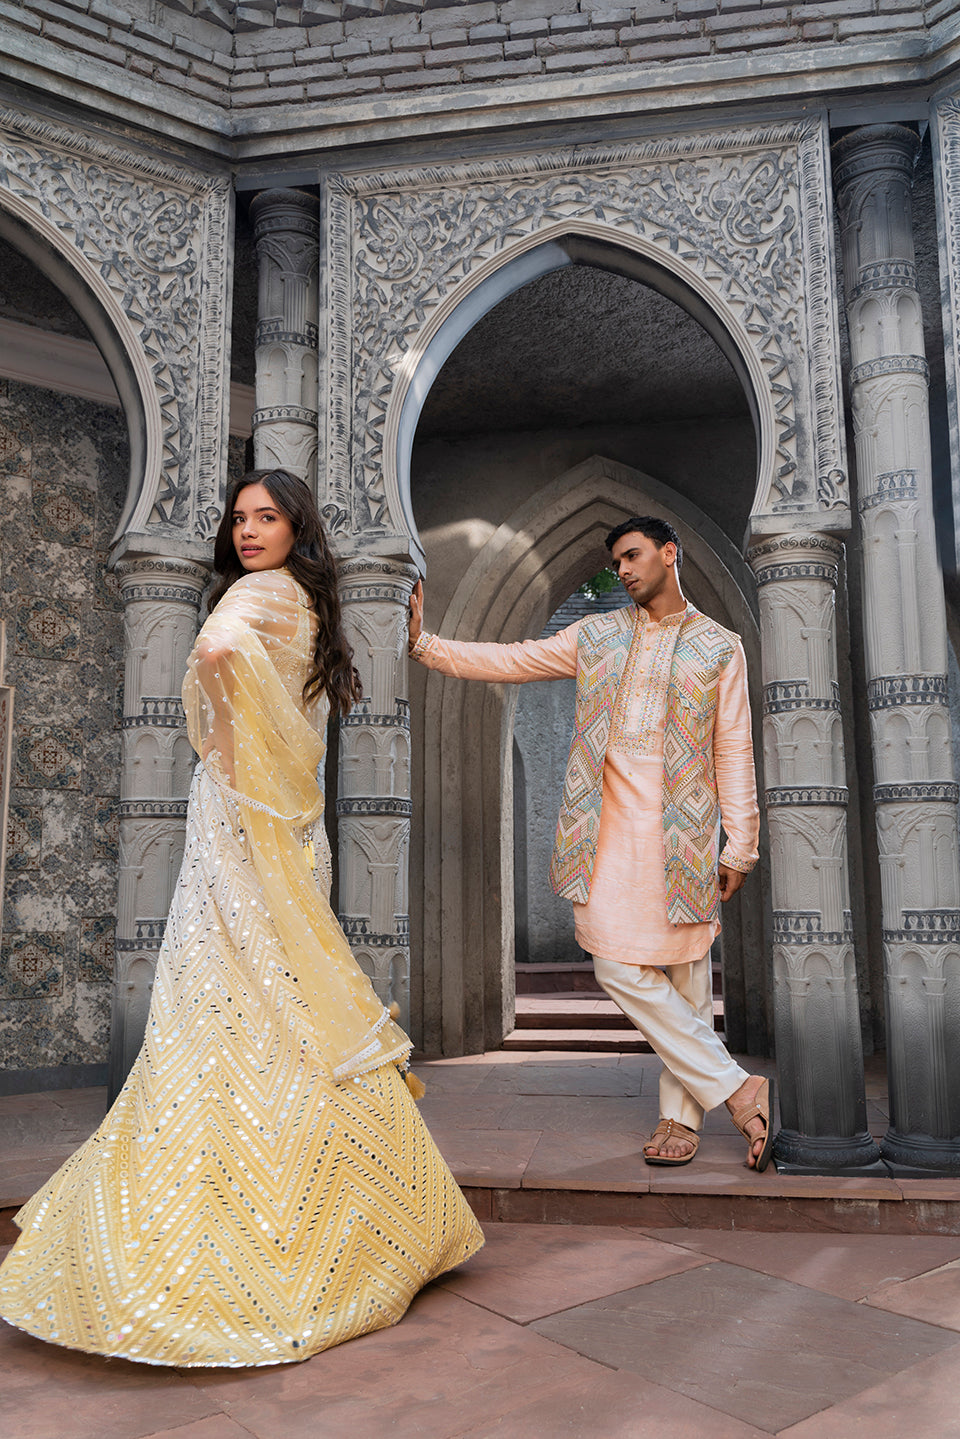 13 Gowns for Indian Wedding Reception That Are Truly Spectacular | Indian  wedding reception gowns, Wedding reception dress, Wedding reception gowns